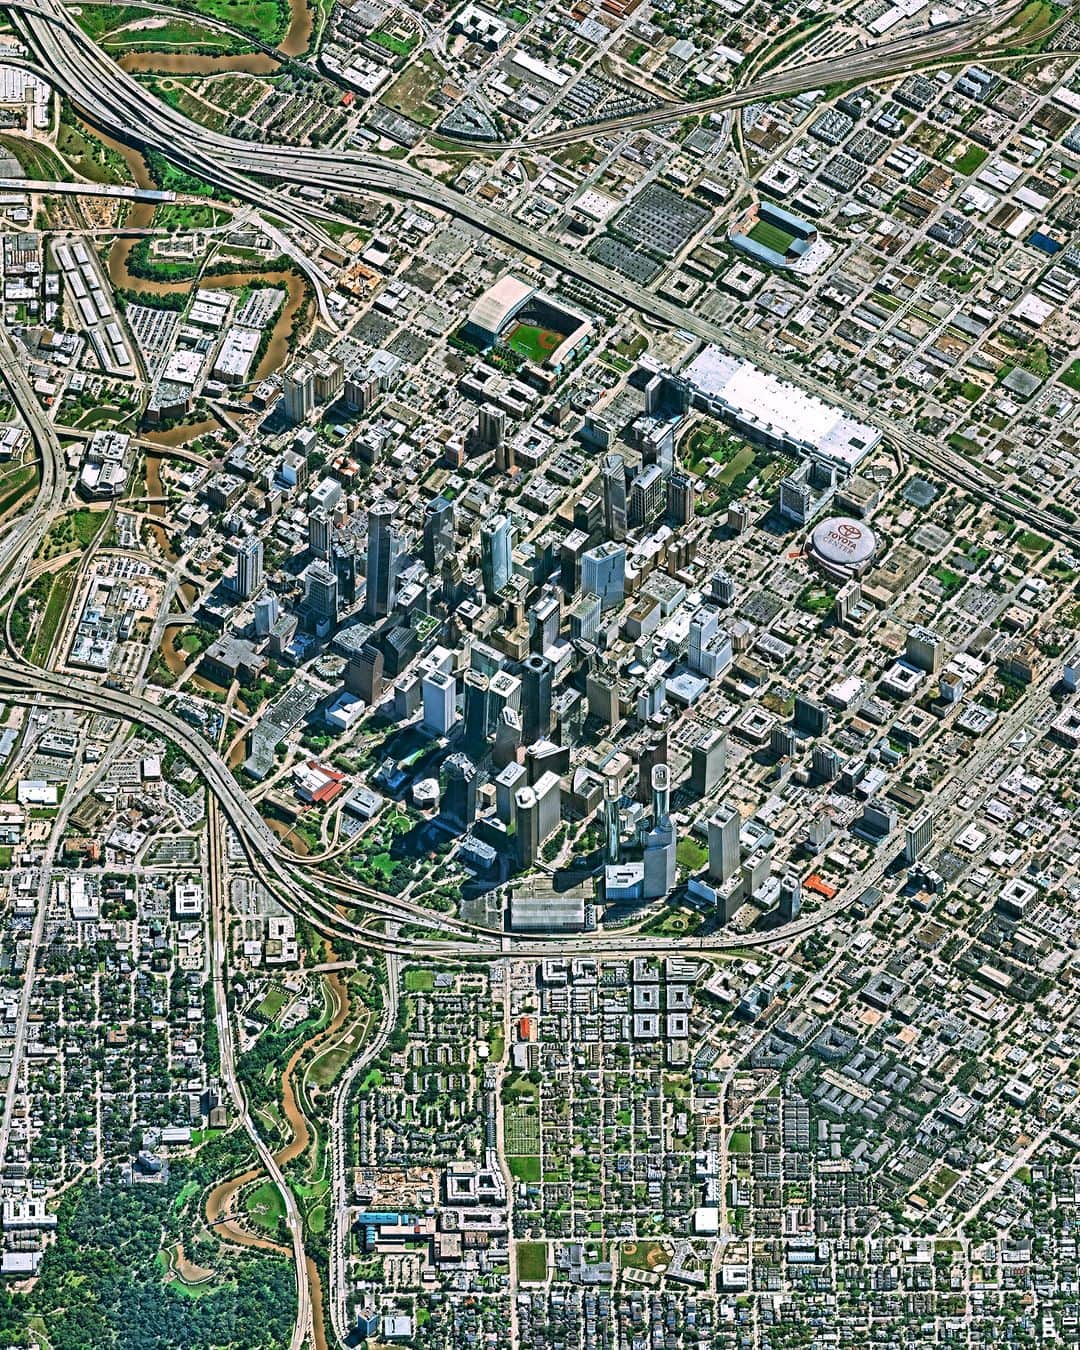 Daily Overviewのインスタグラム：「Downtown Houston is the largest central business district in the US state of Texas, spanning 1.84 square miles (4.8 sq. km). Home to nine Fortune 500 companies, it contains 50 million square feet (4.6 million sq. m) of office space and is the workplace of 150,000 employees. In addition to most of Houston’s skyscrapers, this Overview features Minute Maid Park, home of the Astros (MLB); Shell Energy Stadium, home of the Dynamo (MLS); and Toyota Center, home of the Rockets (NBA).  Created by @dailyoverview Source imagery: @nearmap」